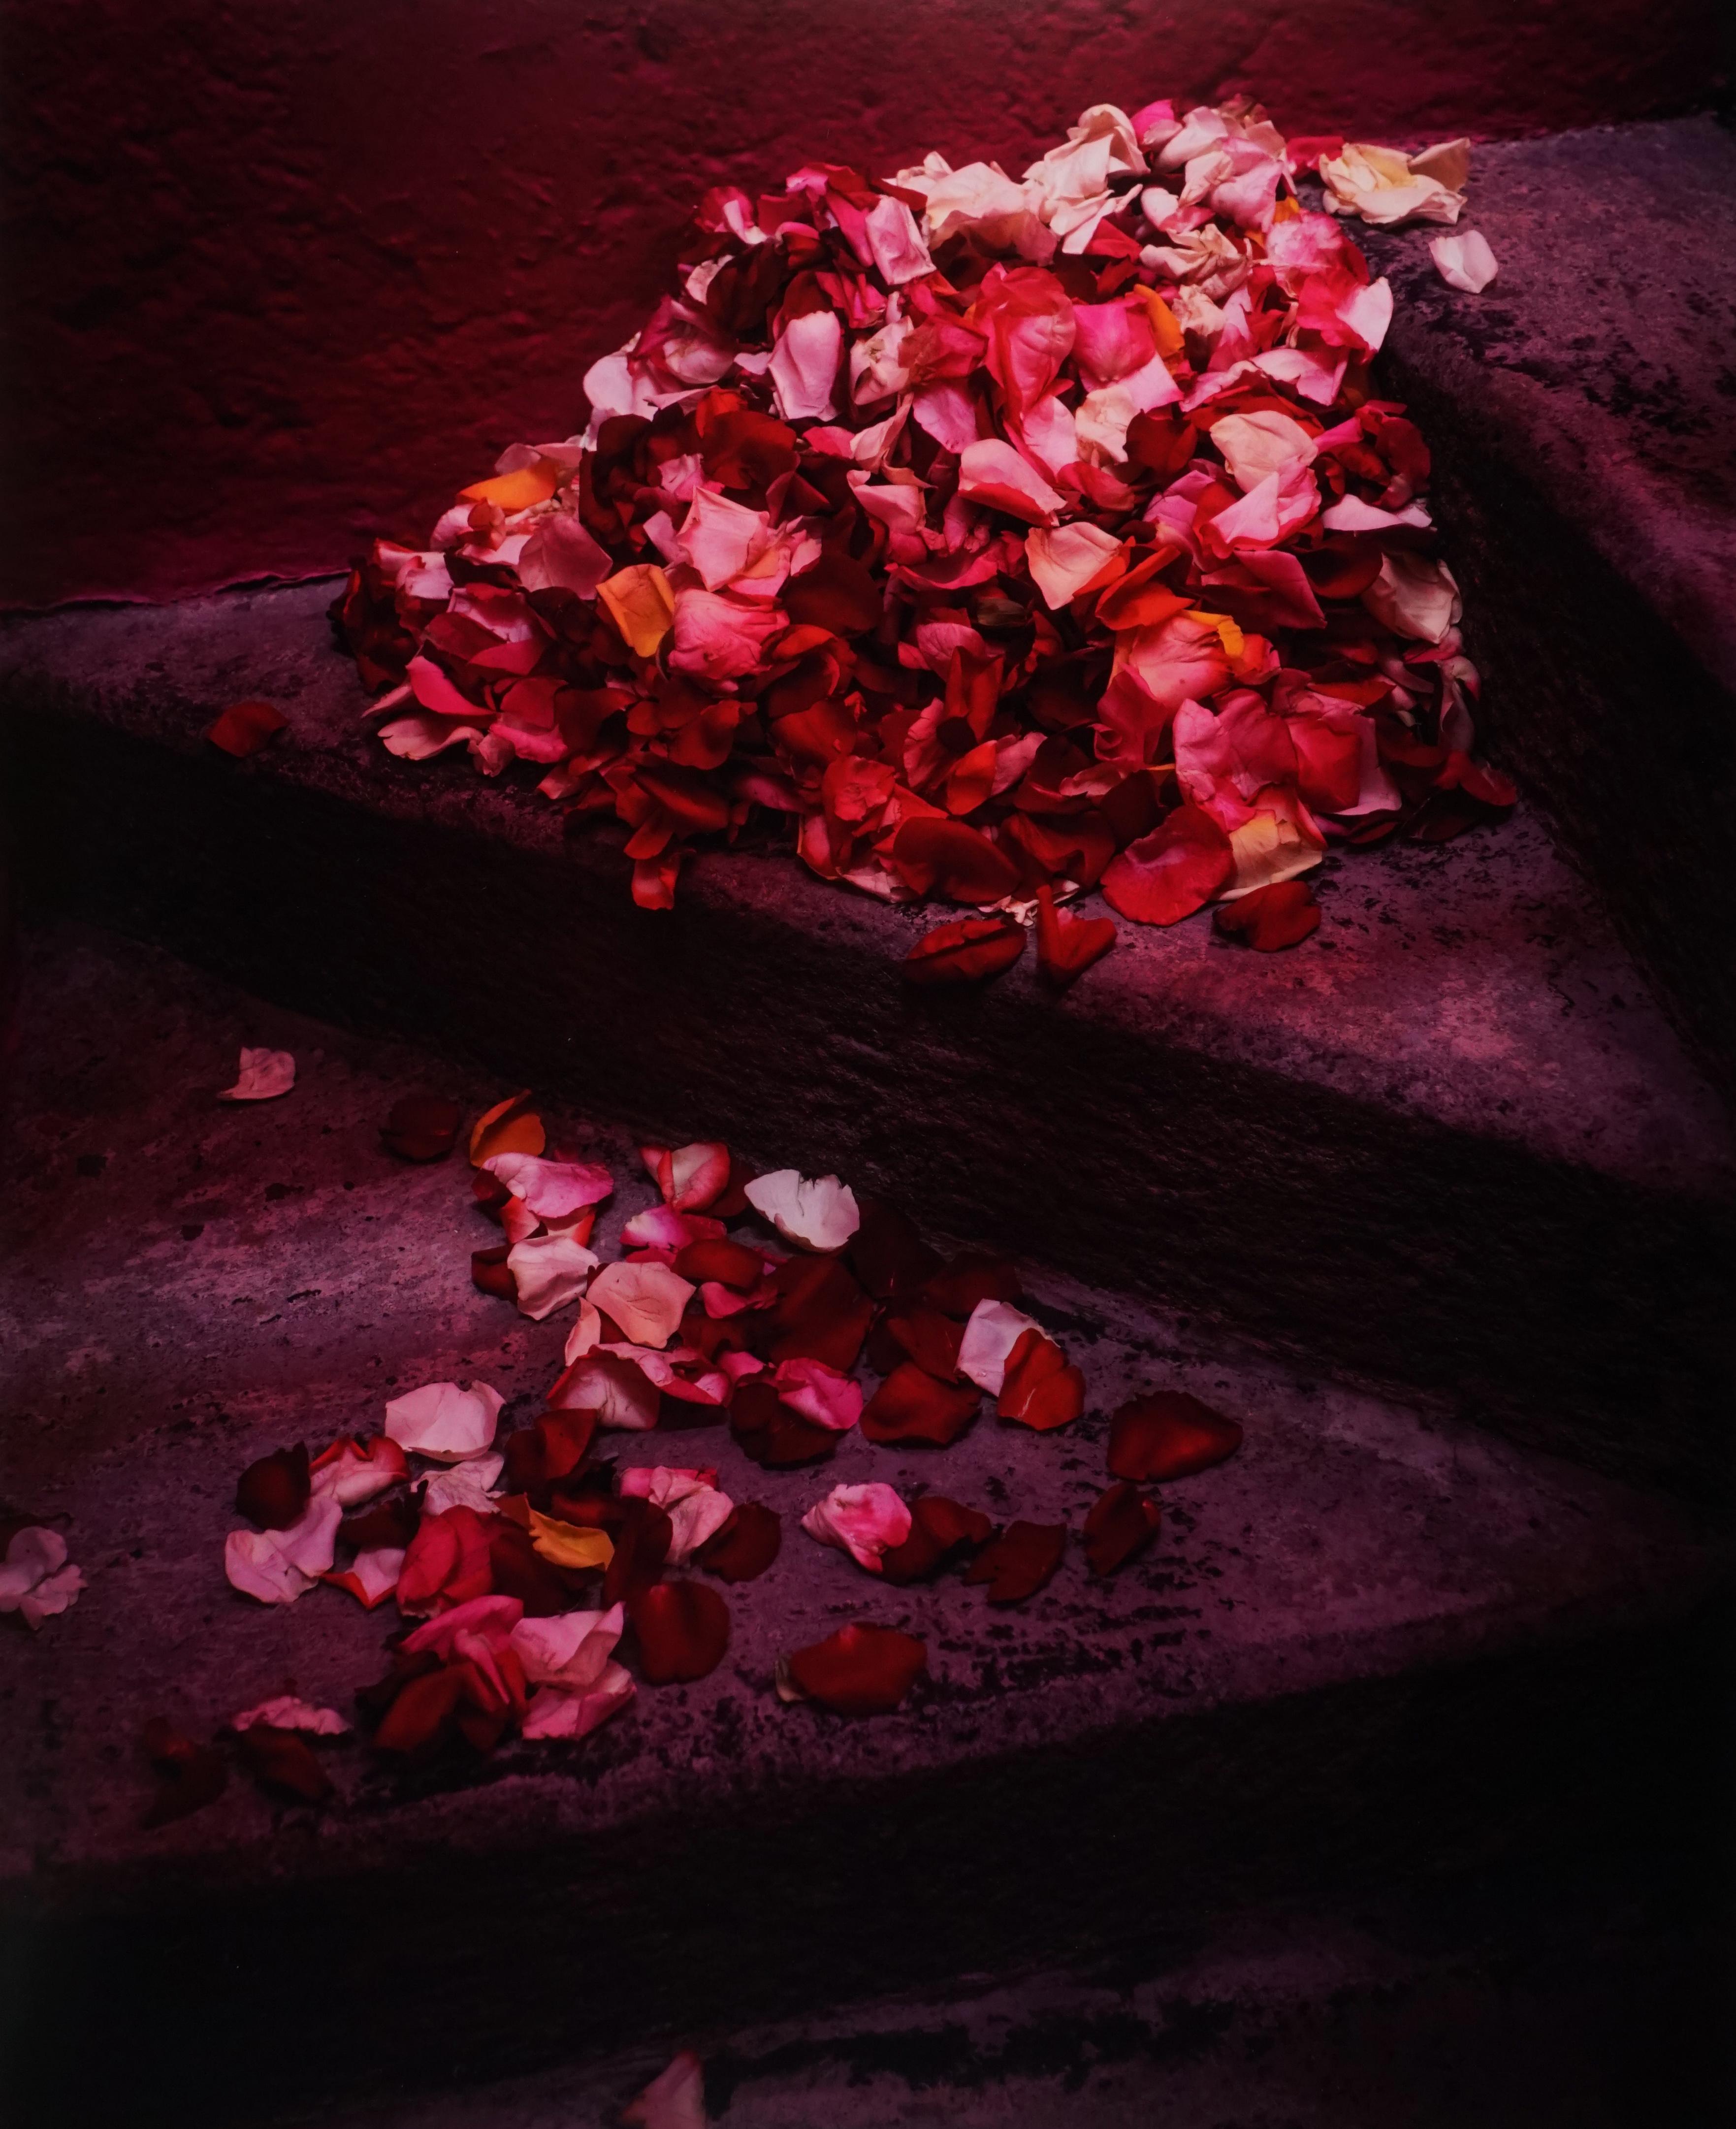 Rose Petals on the Stairs, Mexico, 2020